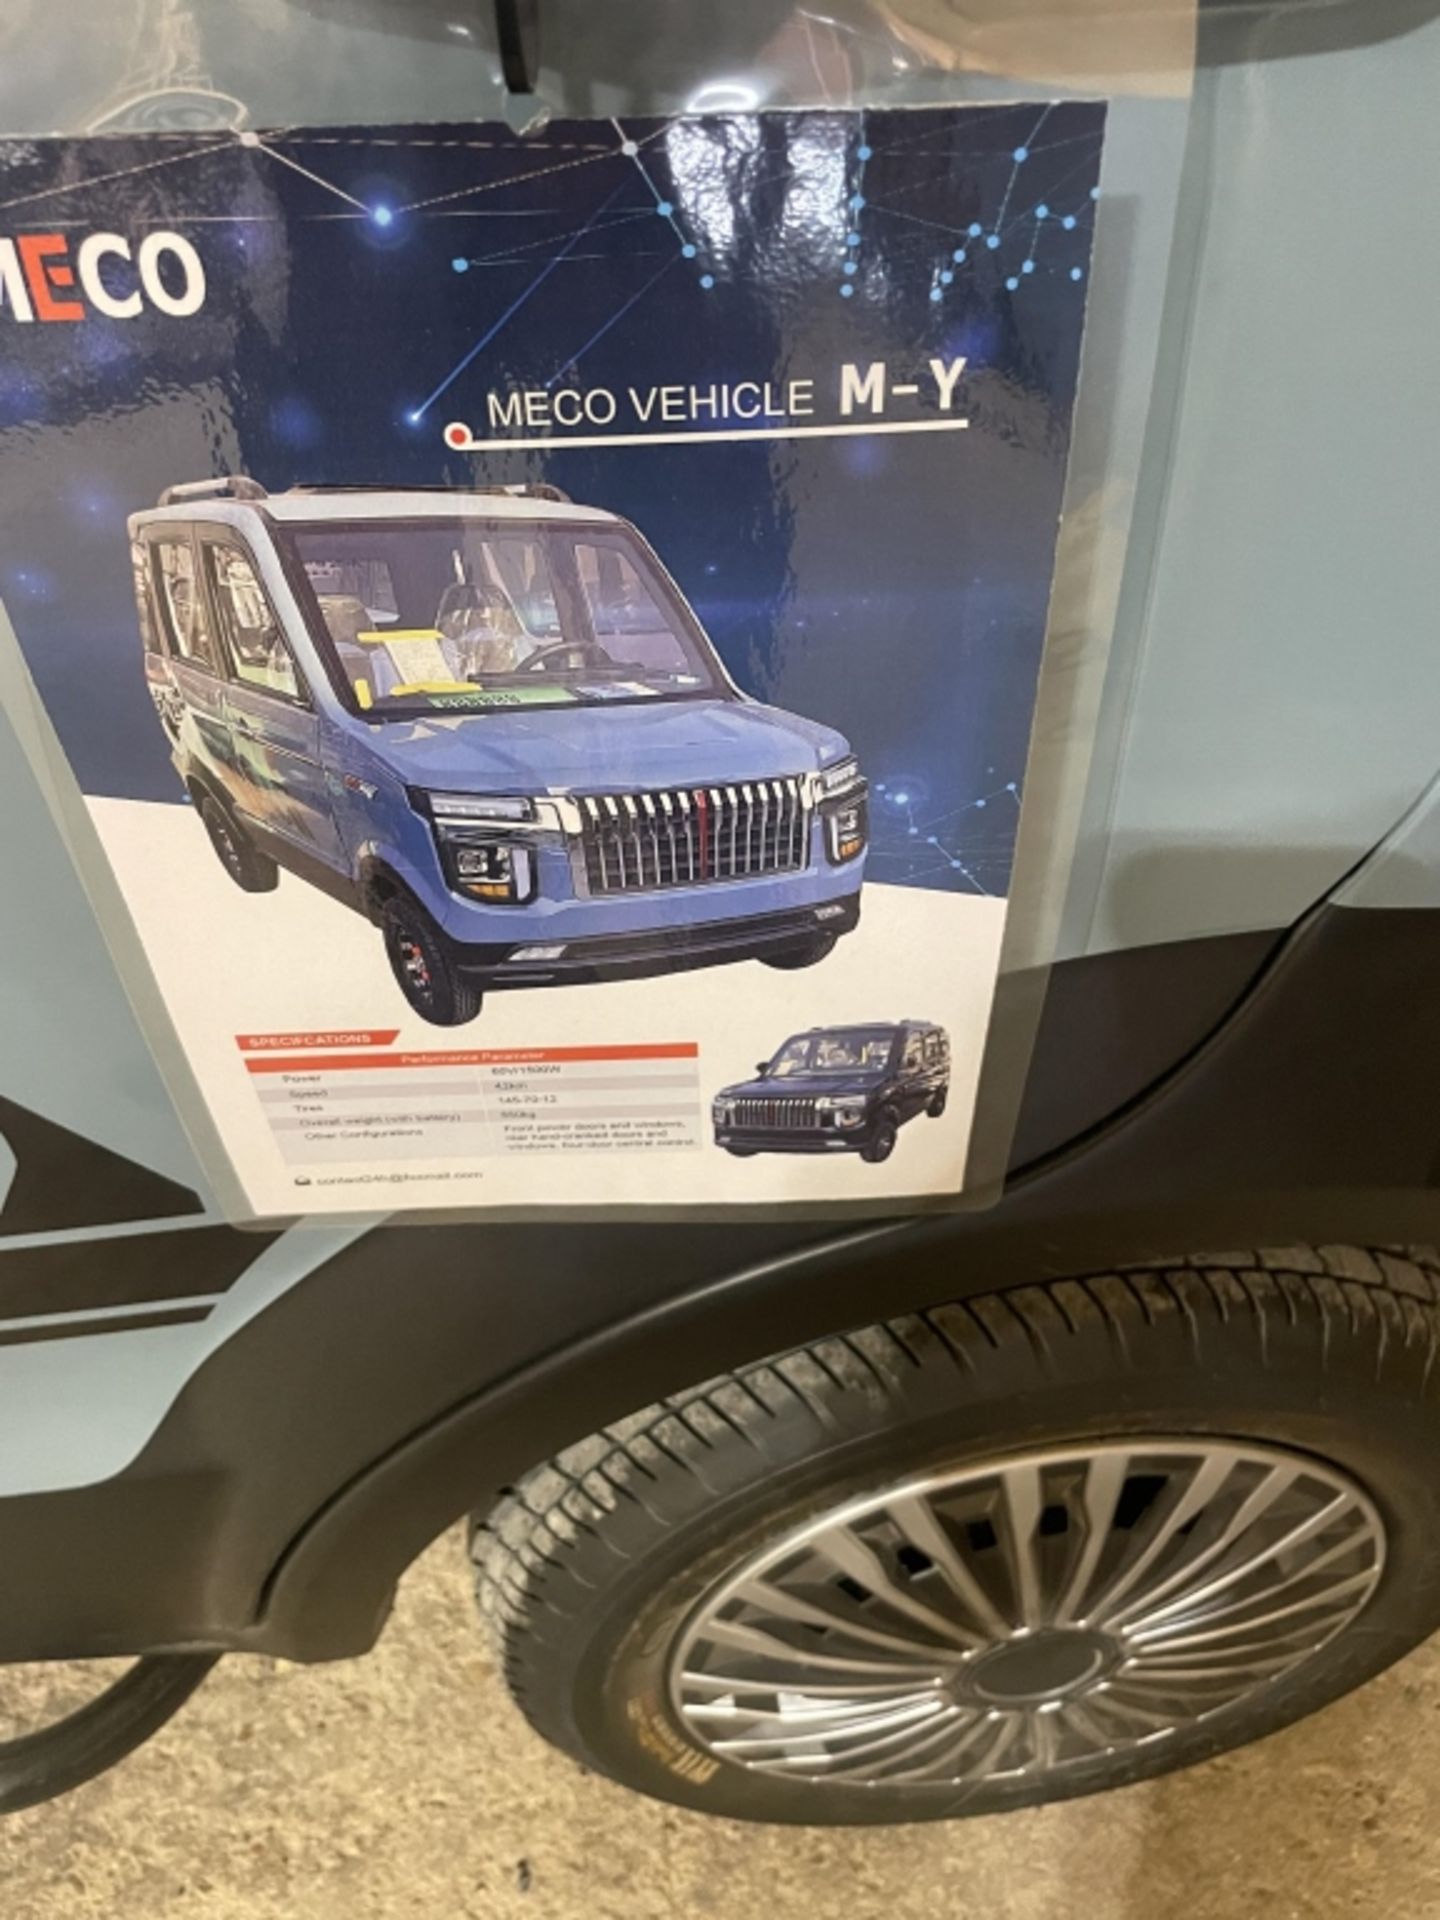 MECO M-Y Electric Vehicle - Image 14 of 15